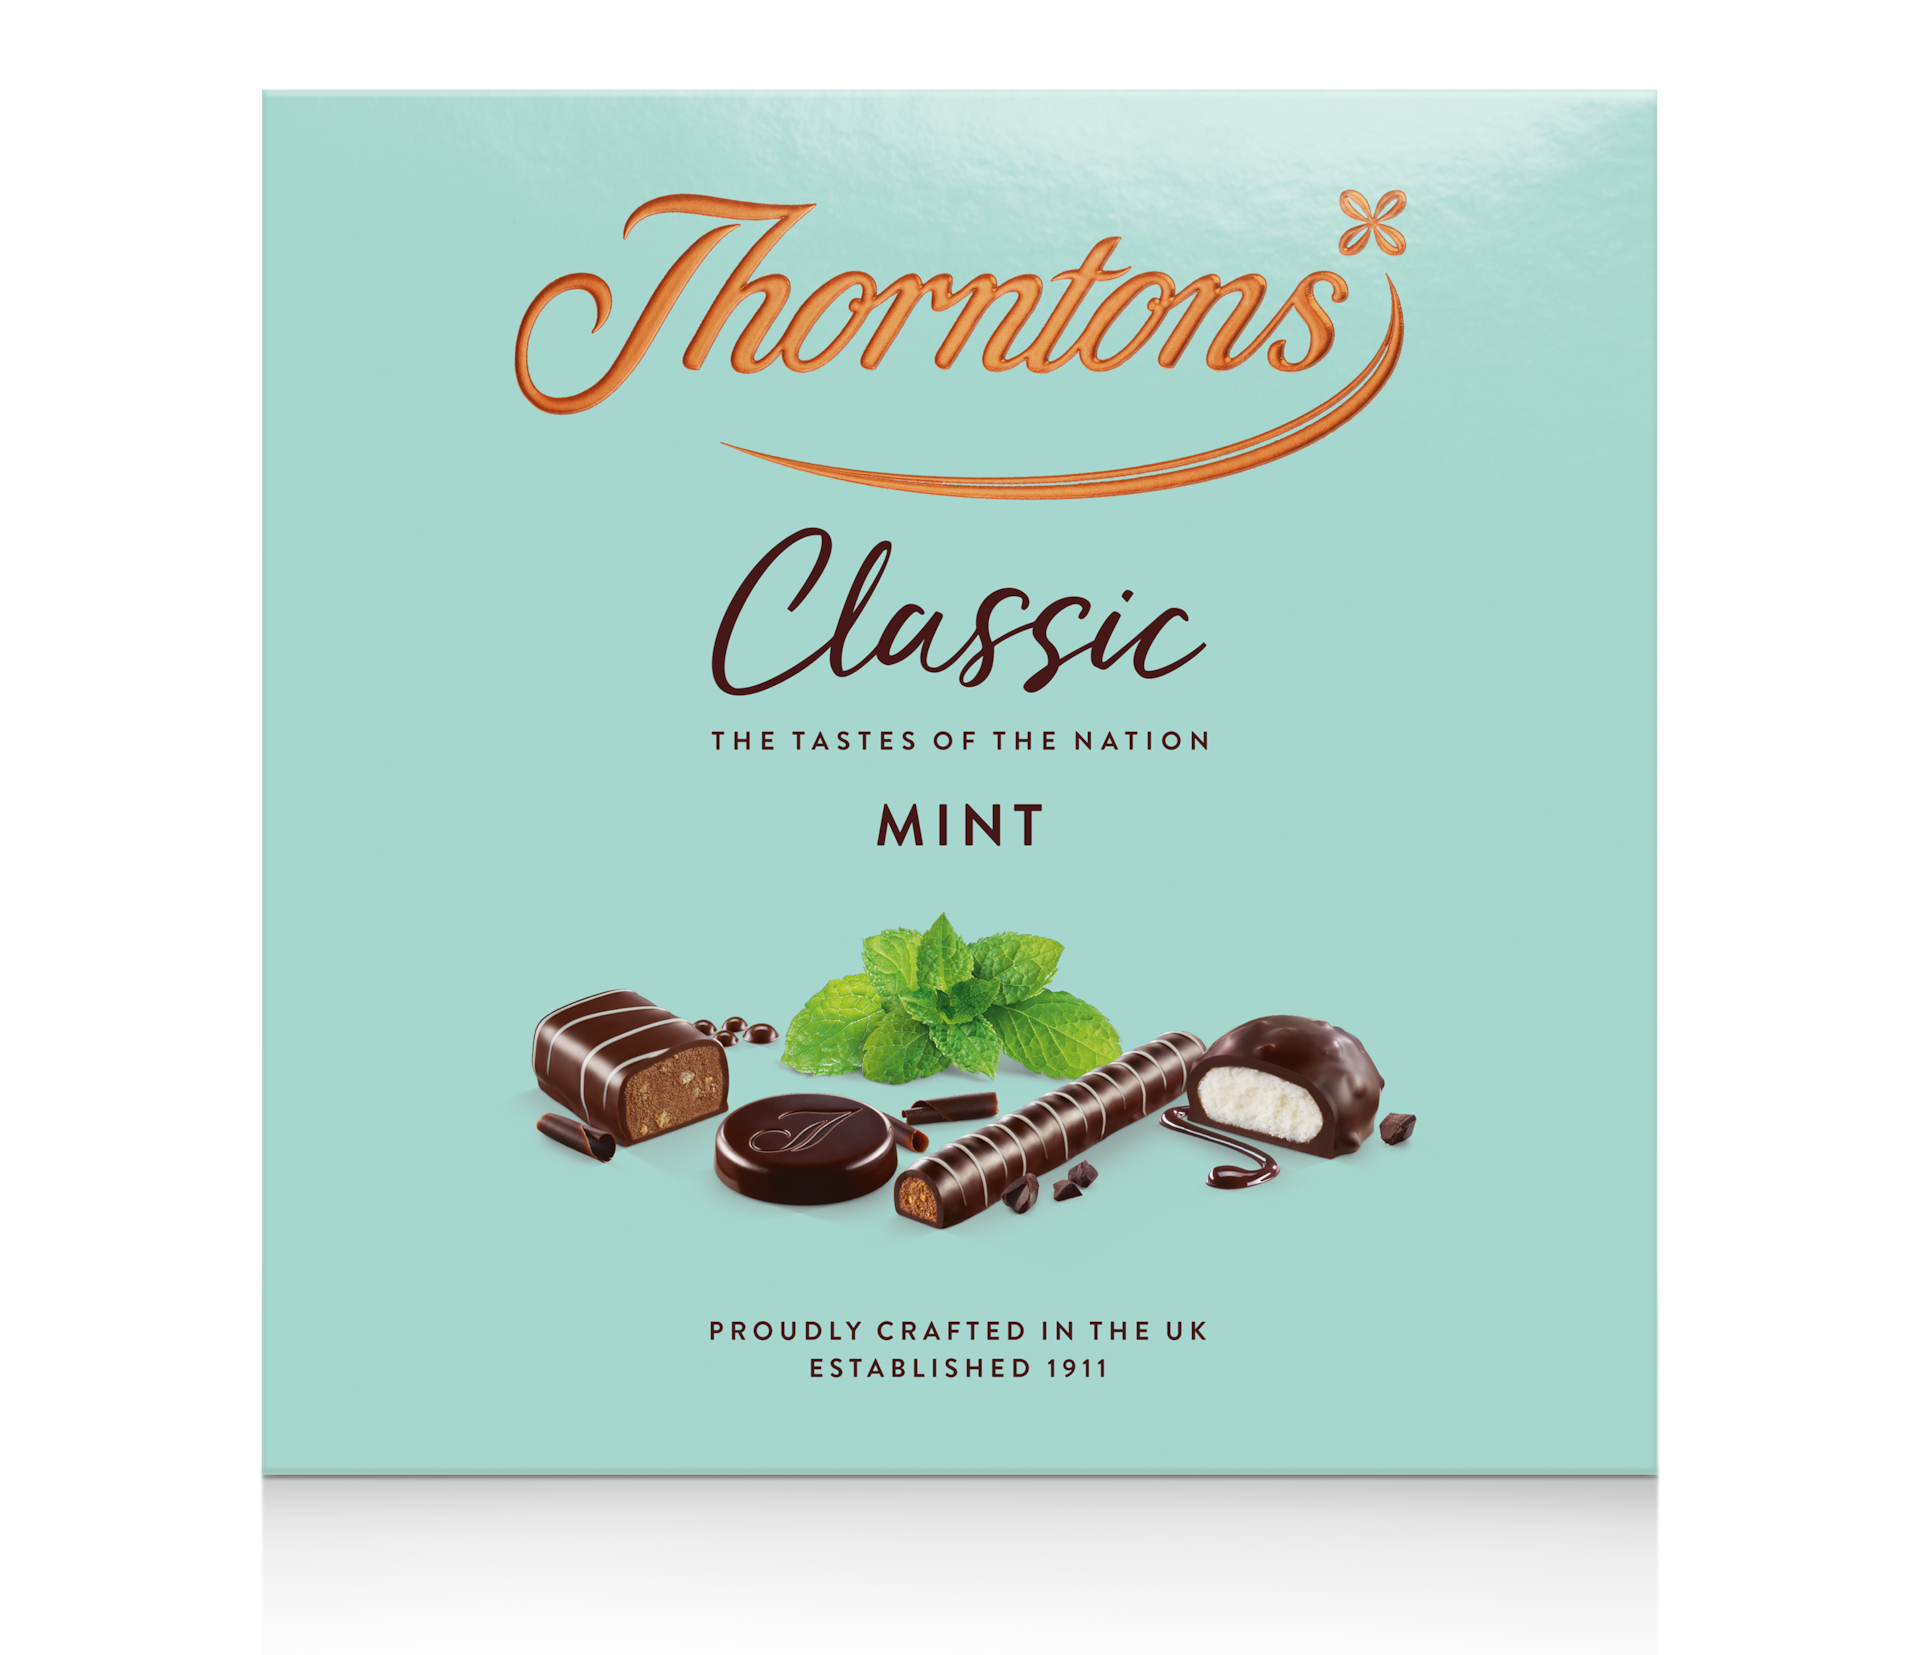 https://www.thorntons.com/medias/sys_master/images/h79/h6c/8916766621726/77232645_main/77232645-main.png?resize=xs-s-xs